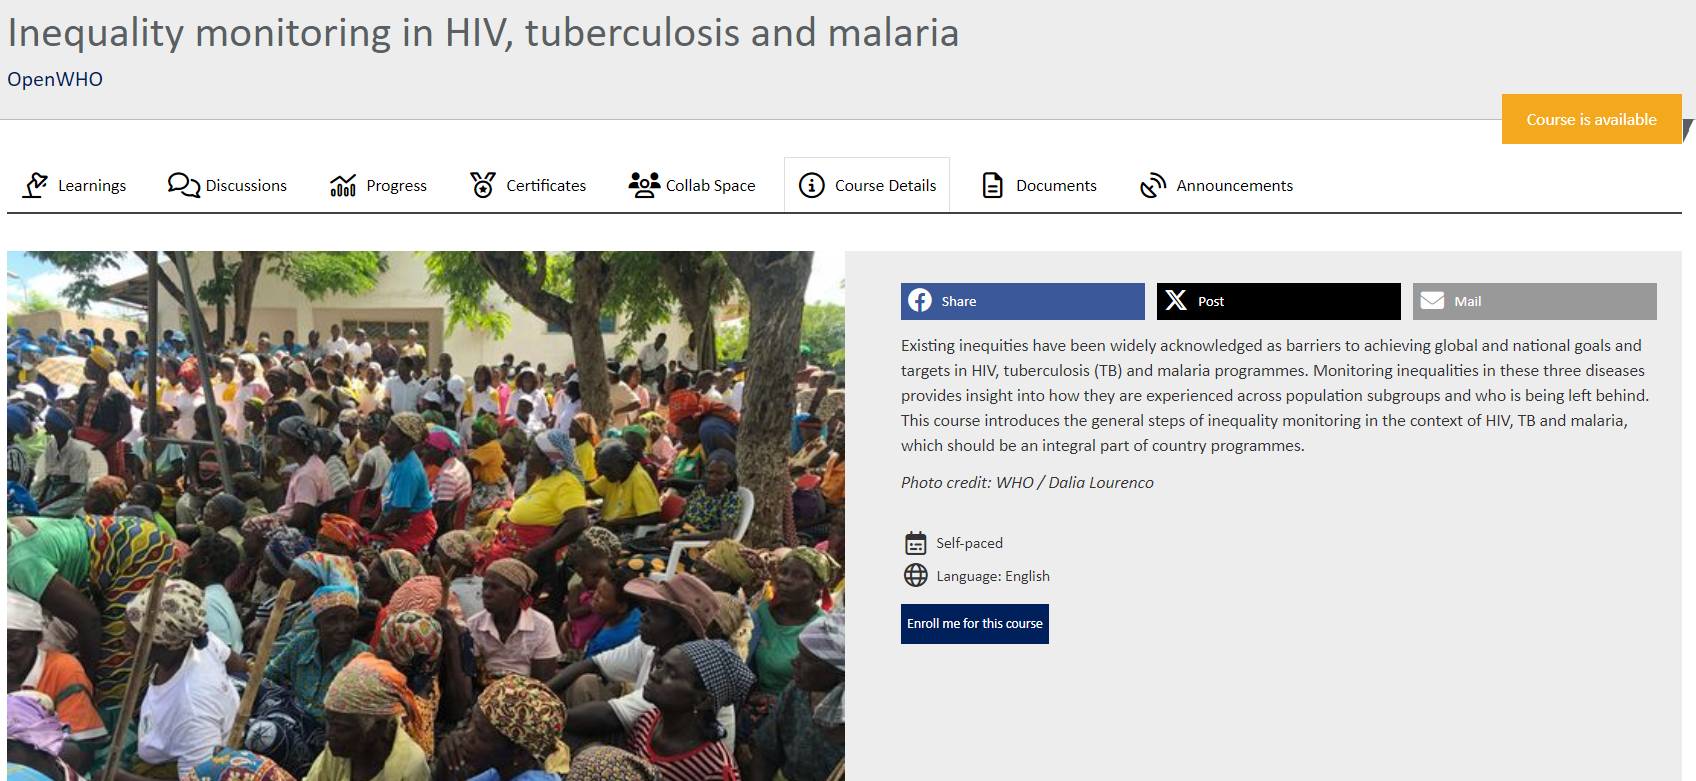 Inequality monitoring in HIV, tuberculosis and malaria